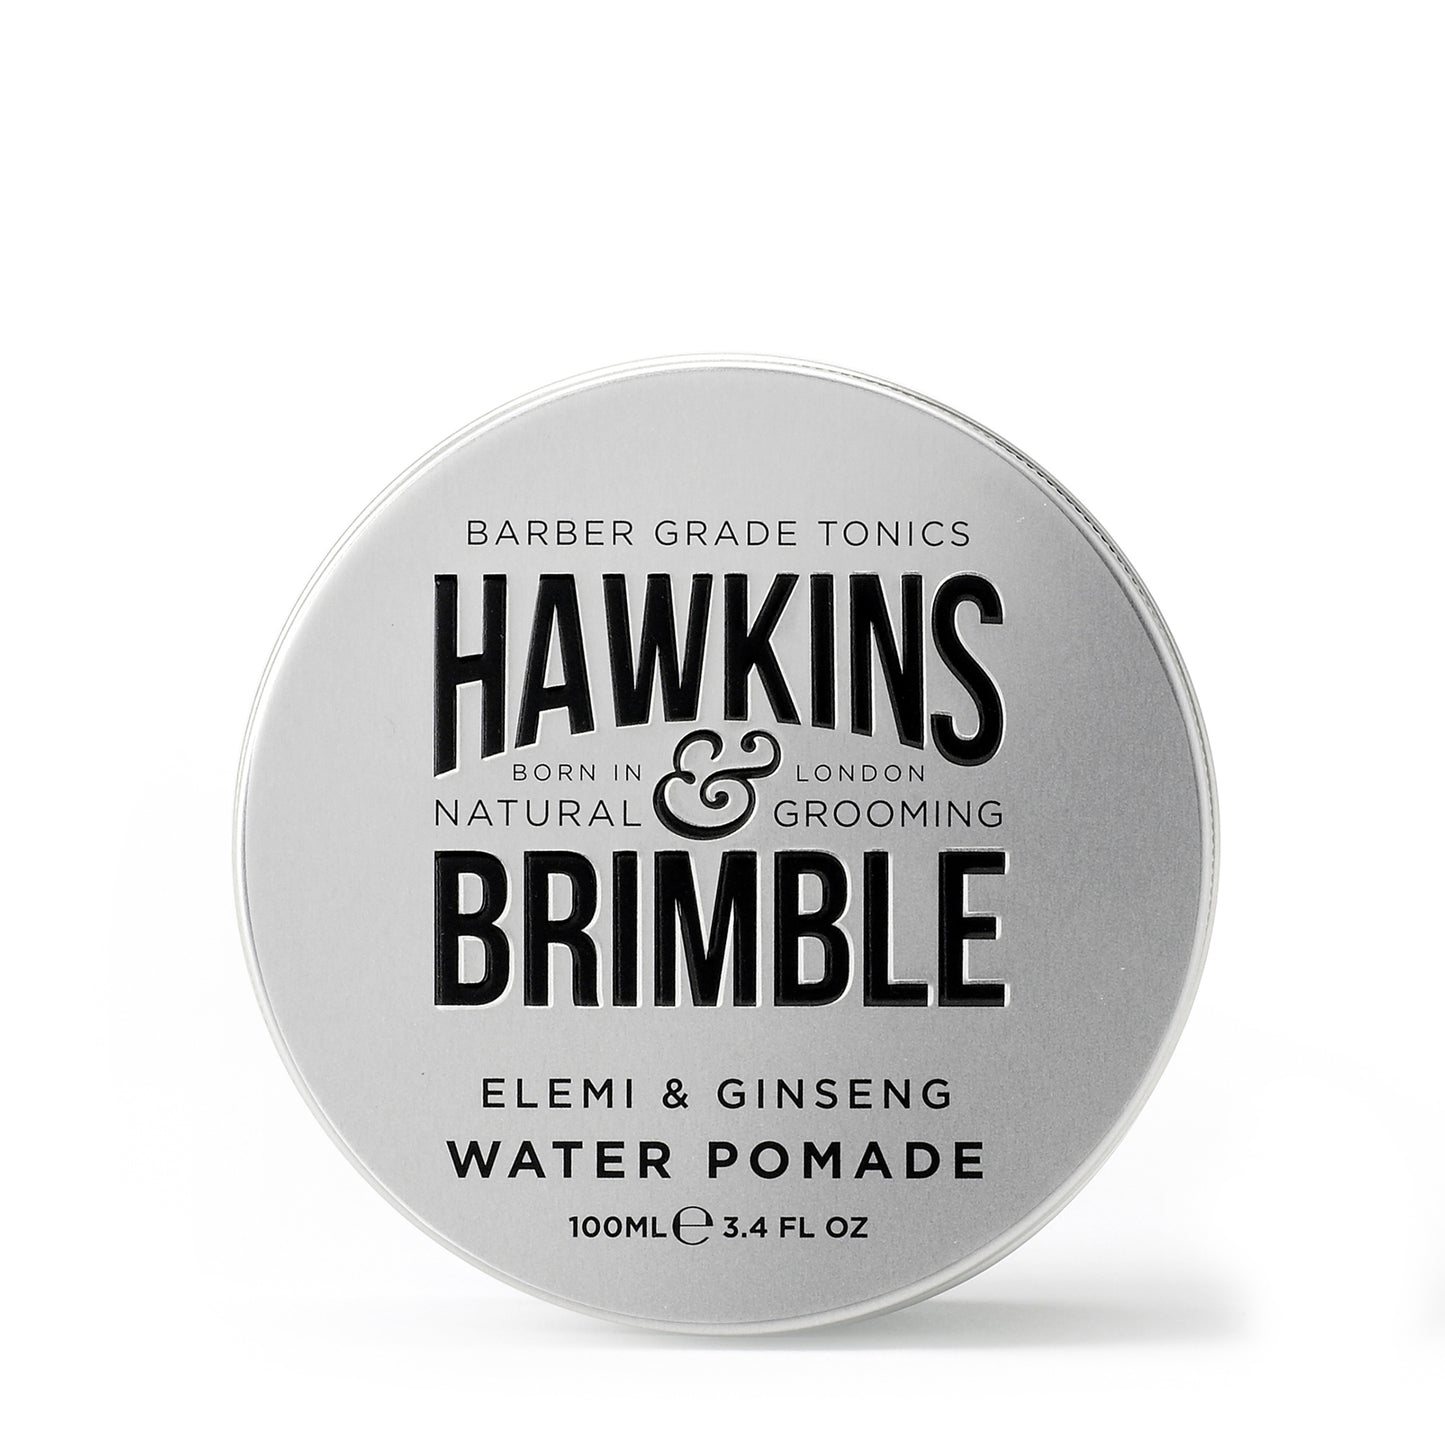 Hawkins and Brimble Water Pomade